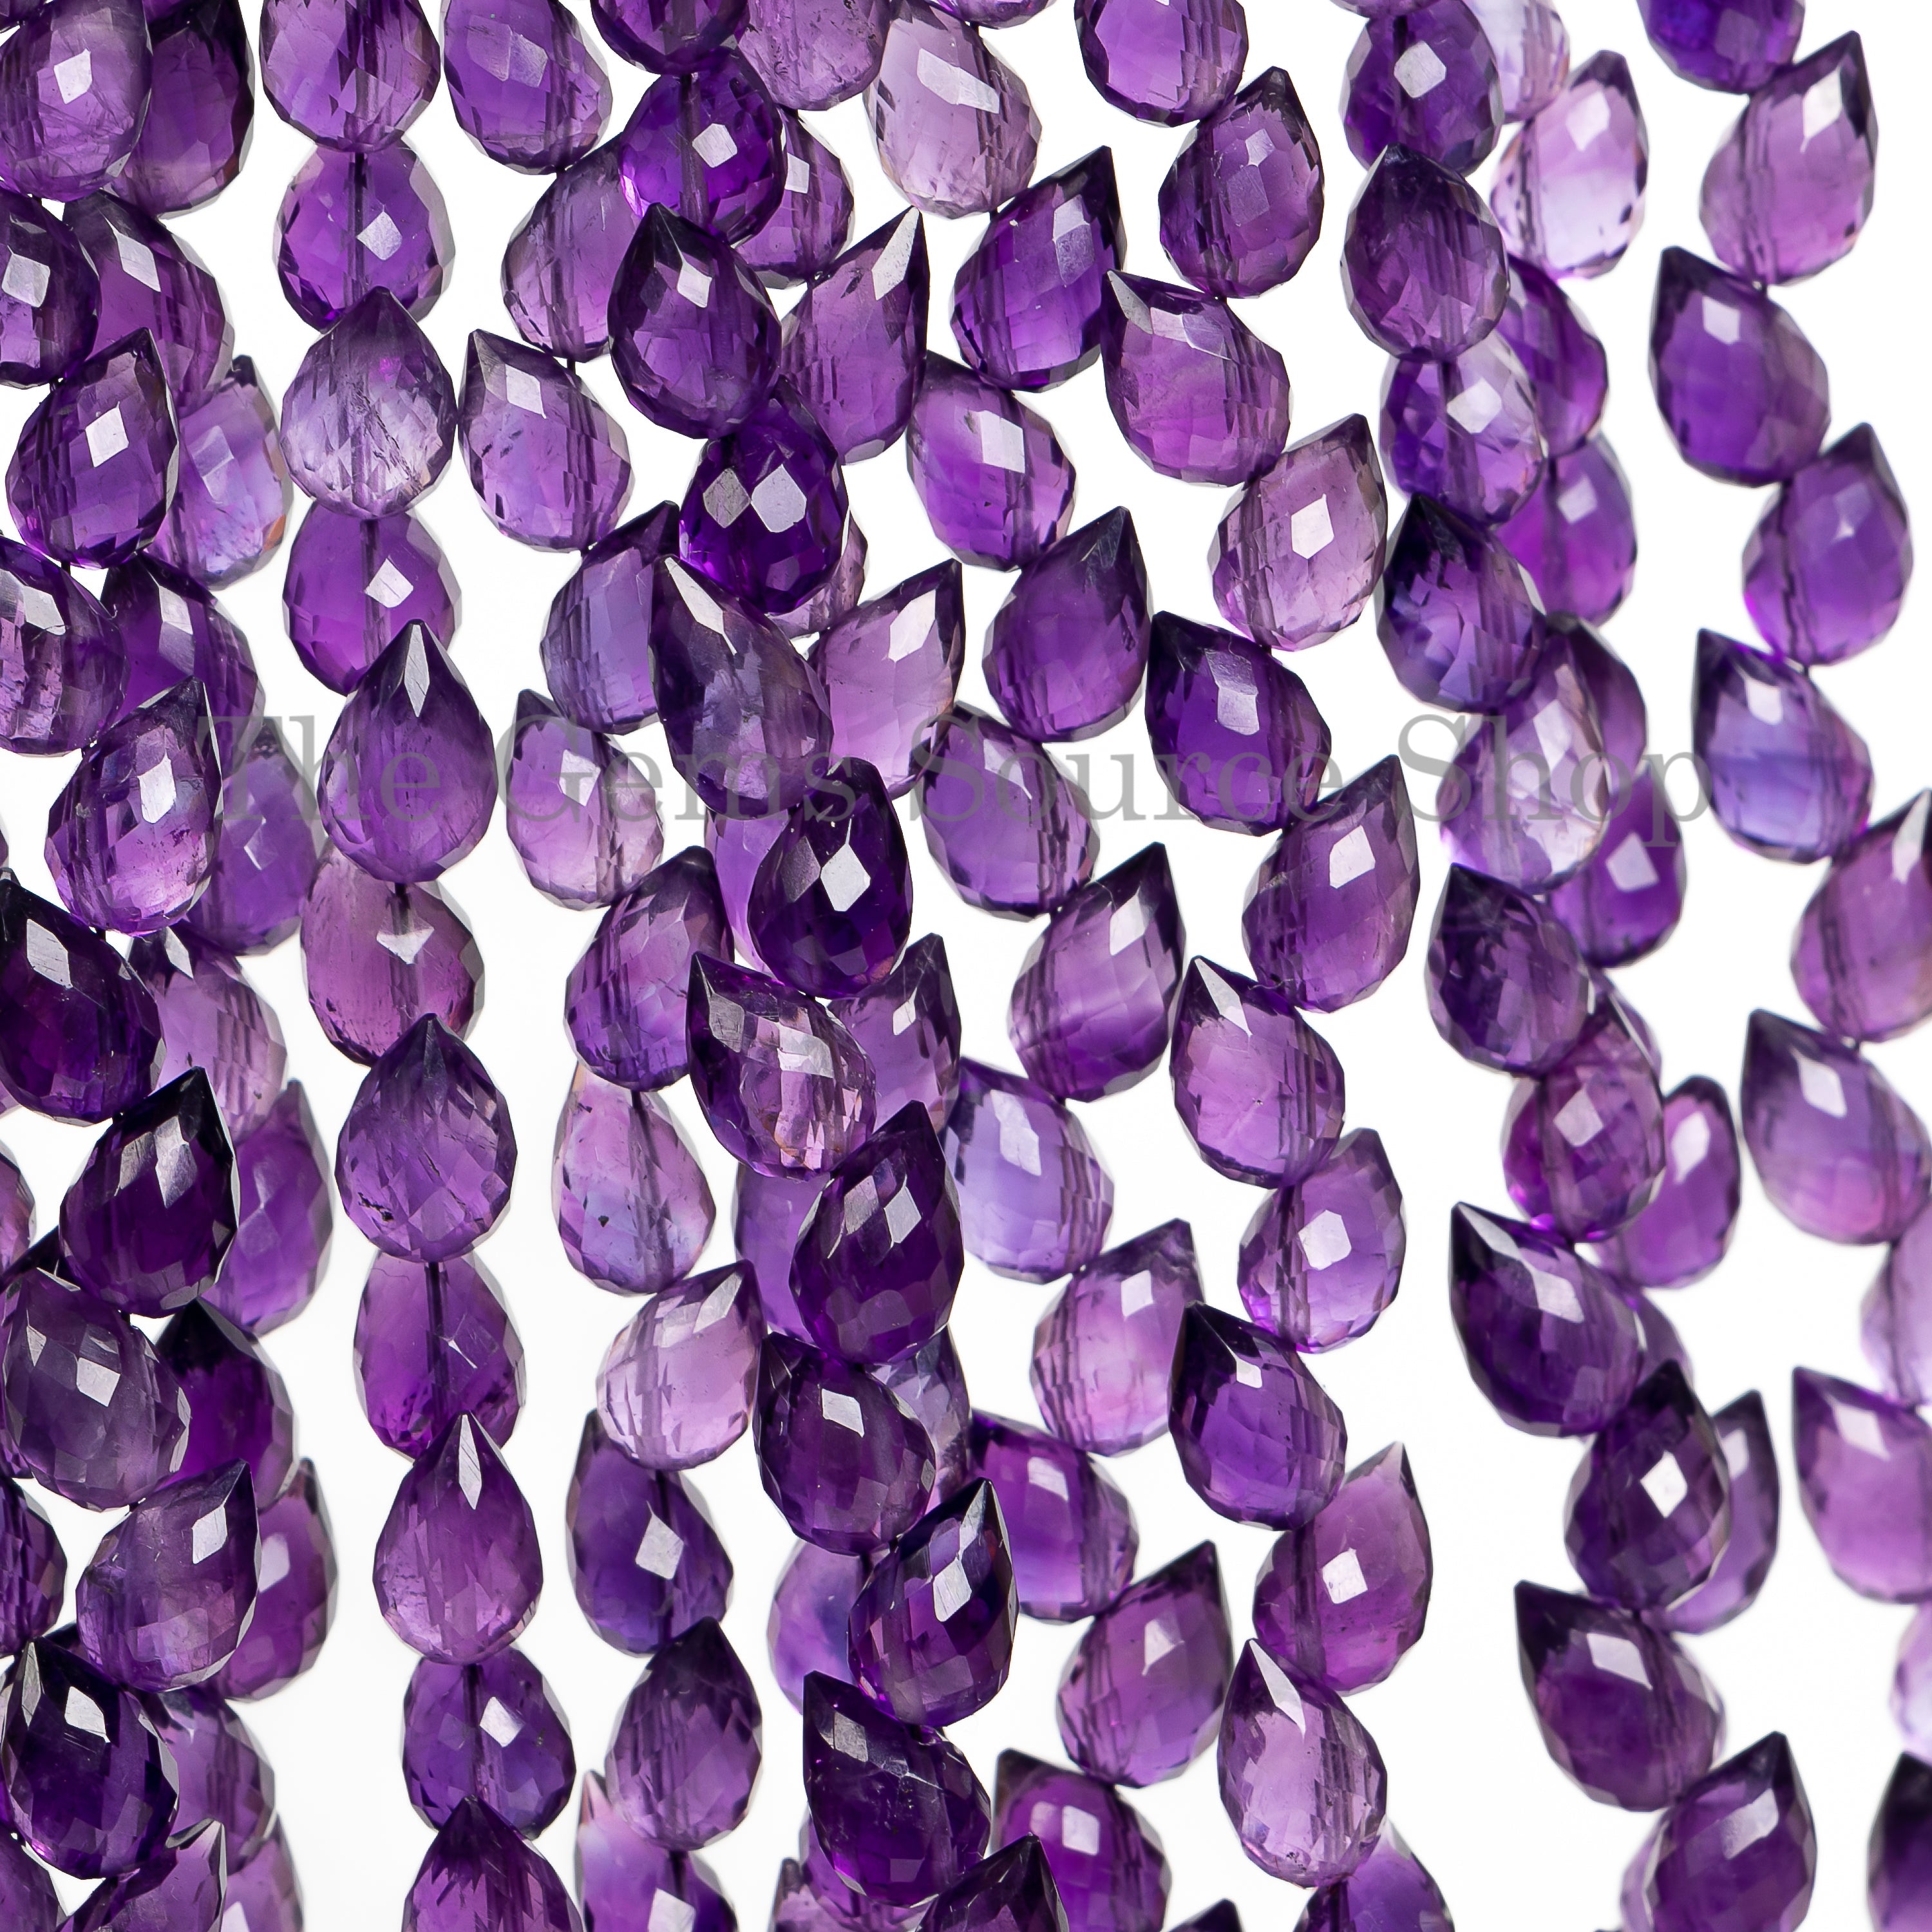 4x6-6x9 mm Natural African Amethyst Briolette Side Drill Drops Loose Gemstone Beads-8"